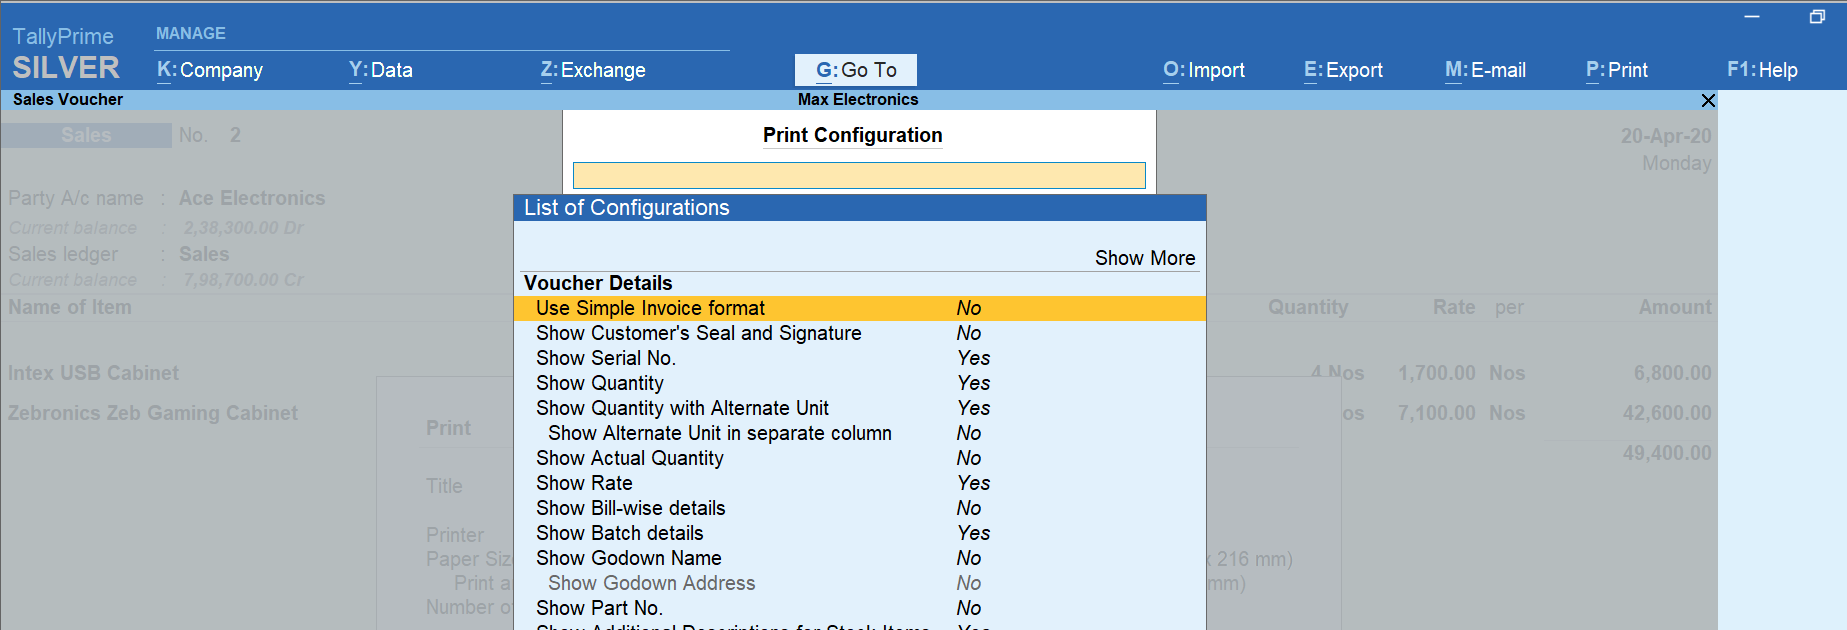 invoice configurations and options in TallyPrime